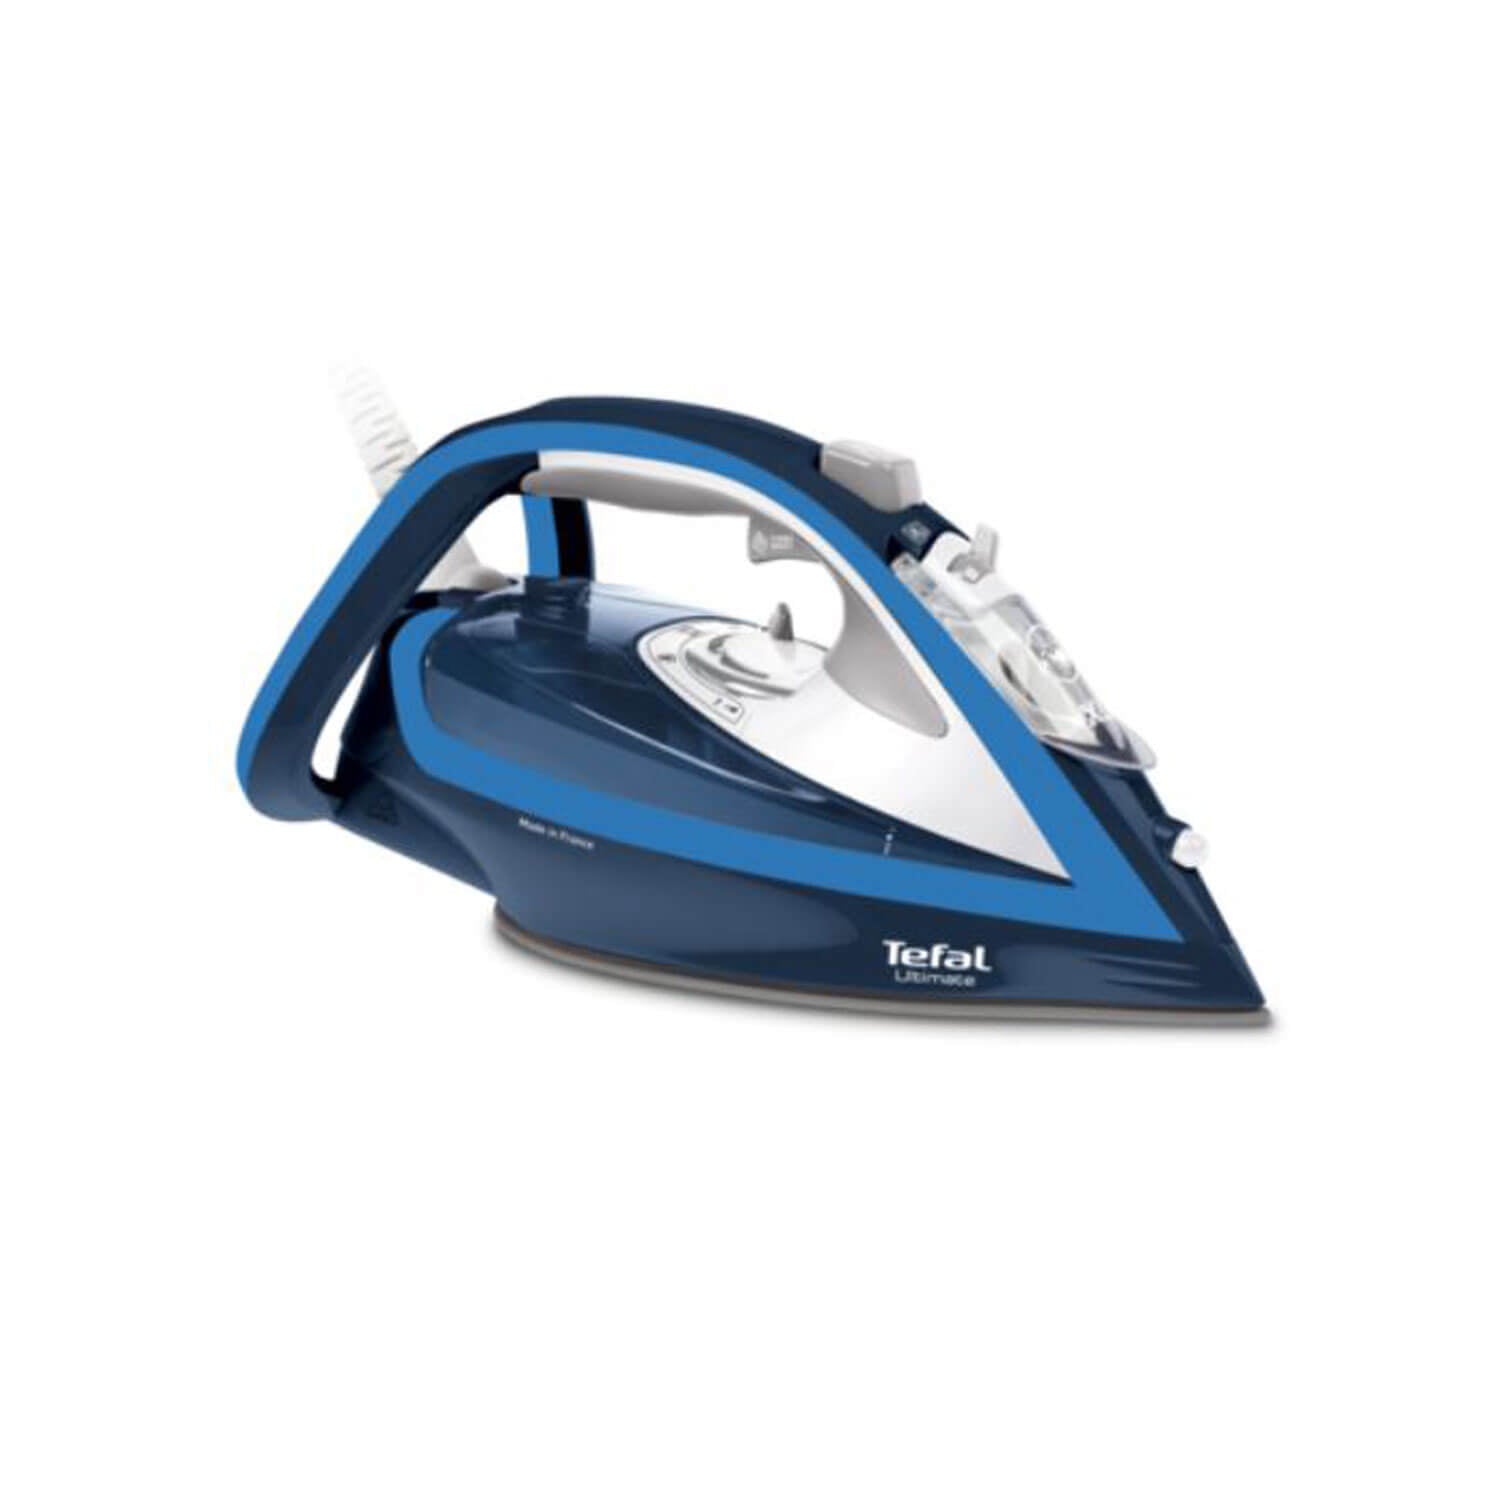 Tefal Turbo Pro 2800W Steam Iron - FV5670GO - Blue 1 Shaws Department Stores